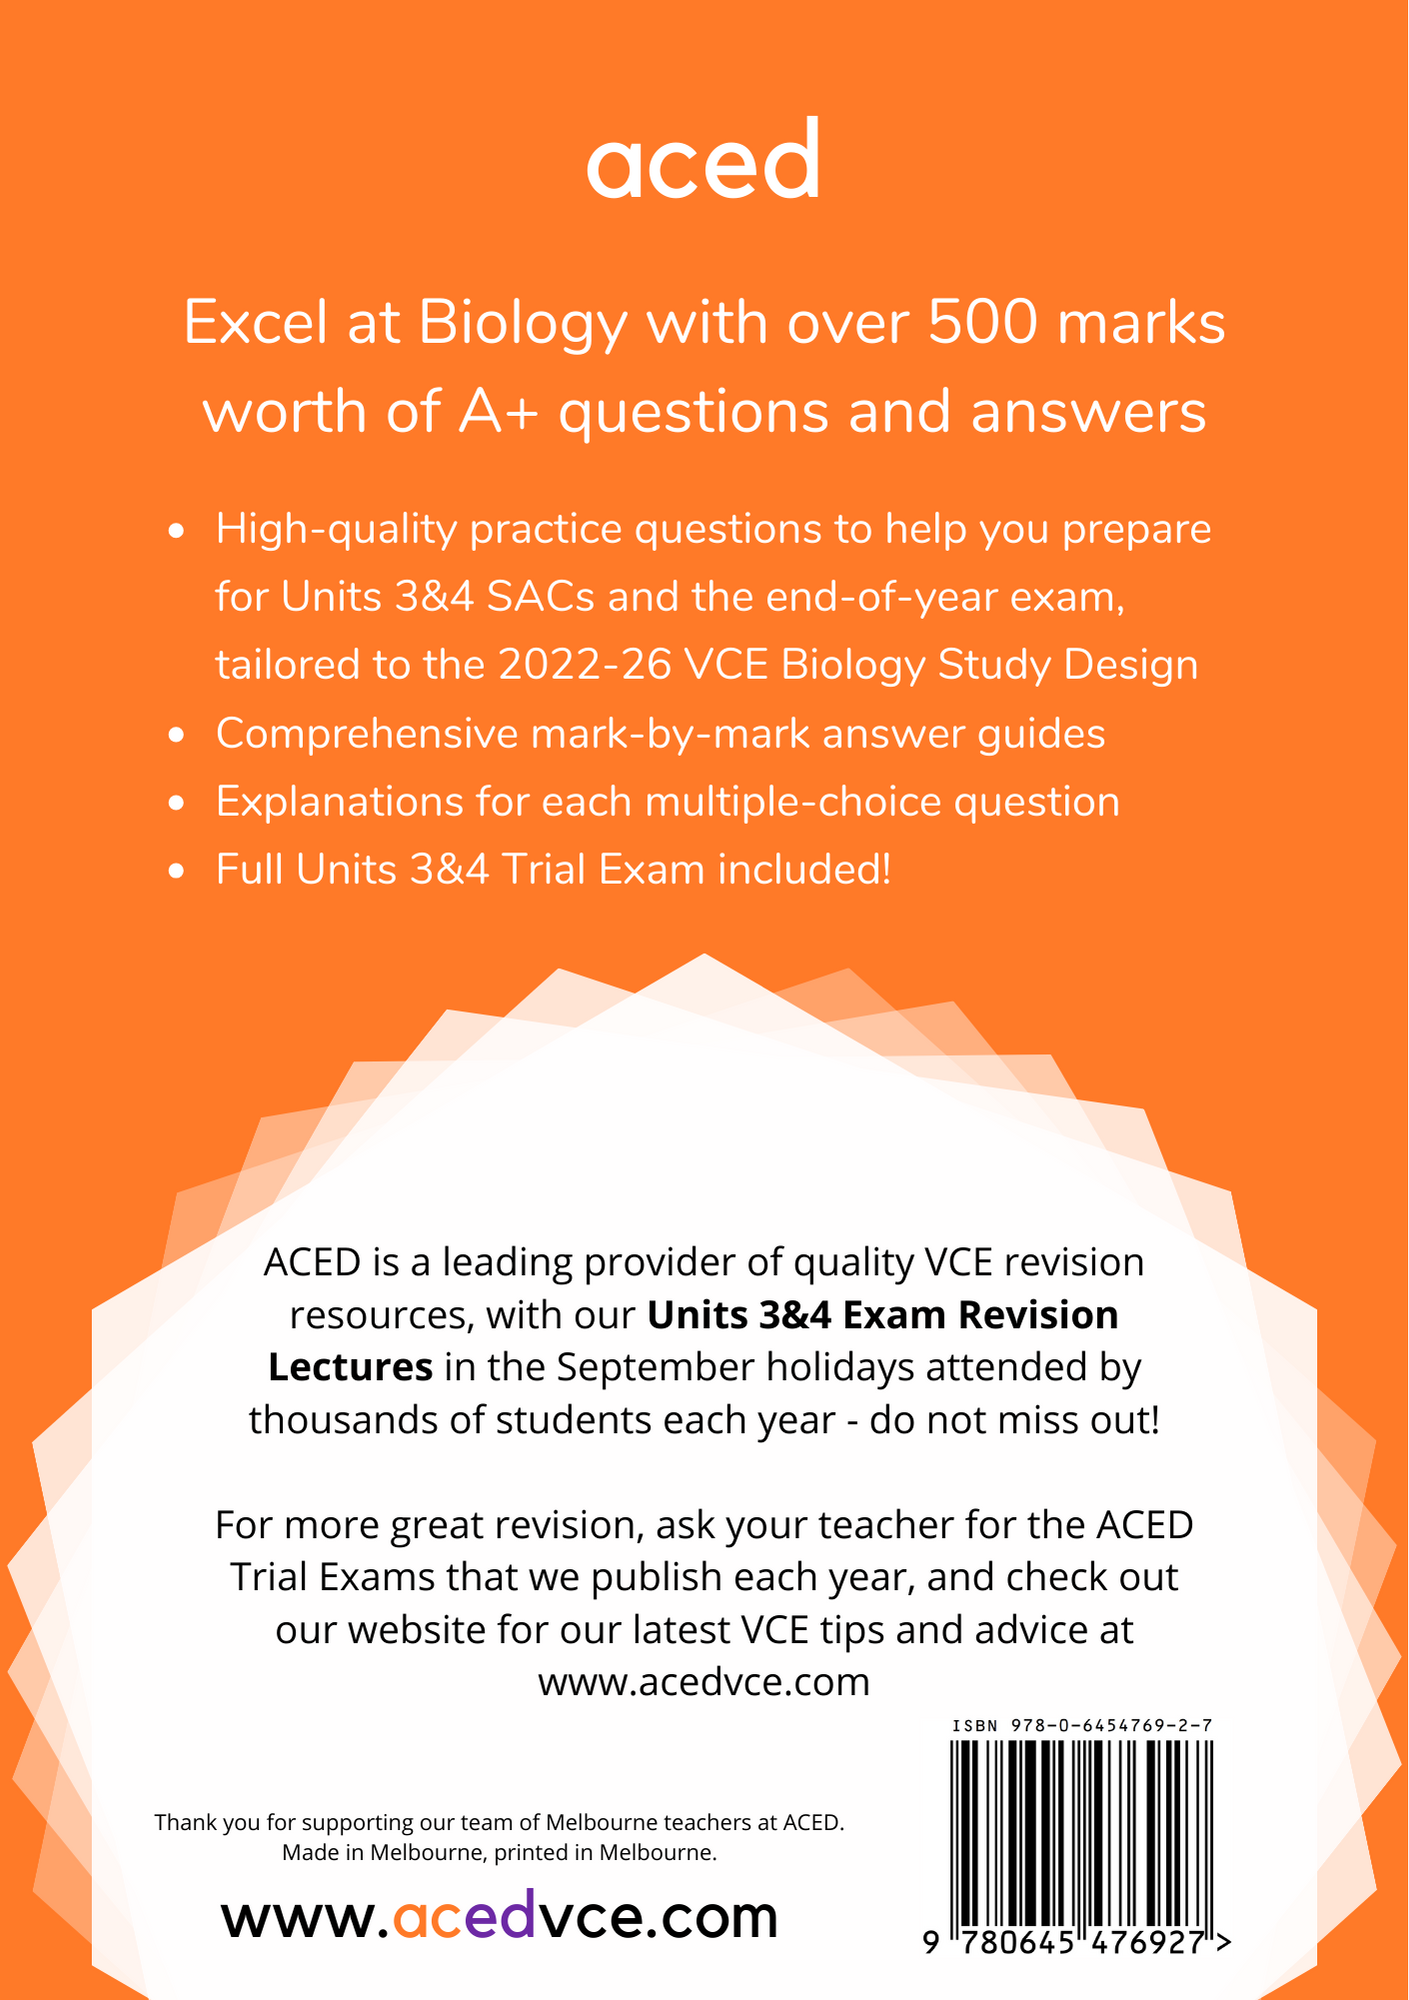 ACED Revision Questions Book - Units 3&4 Biology Edition 1